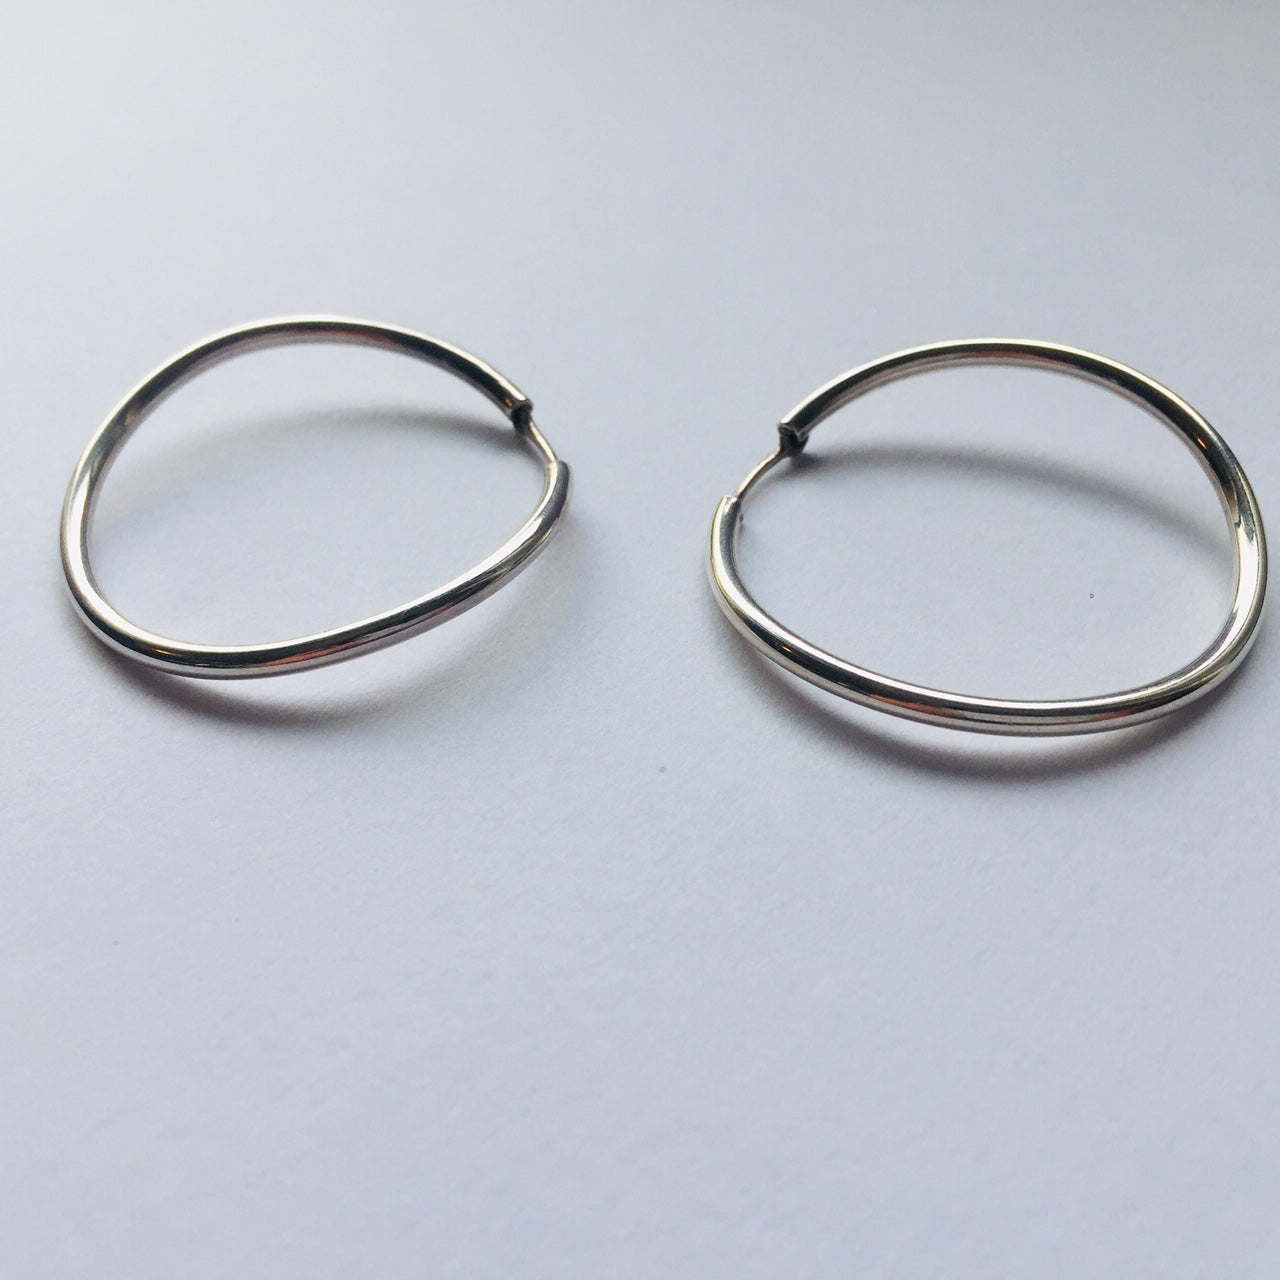 Thick Tube Pipe / Curl  / Inward & Outward Silver925 Shiny Medium Large Hoop with Lever-side Earring For Women シルバー カール ２Ways 内巻 外巻 フープピアス